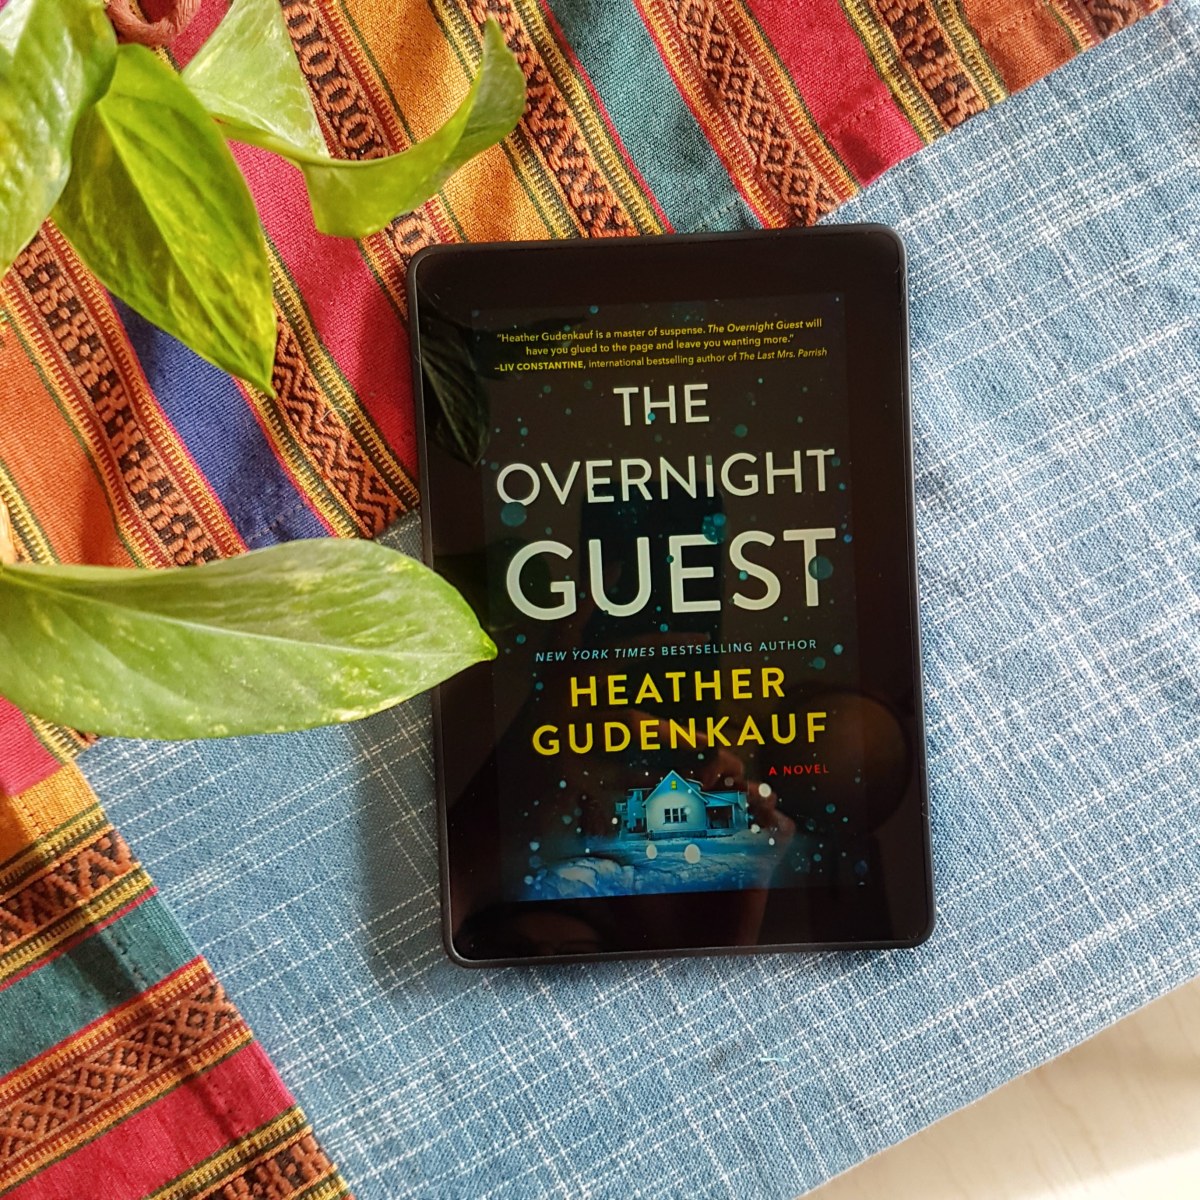 The Overnight Guest by Heather Gudenkauf